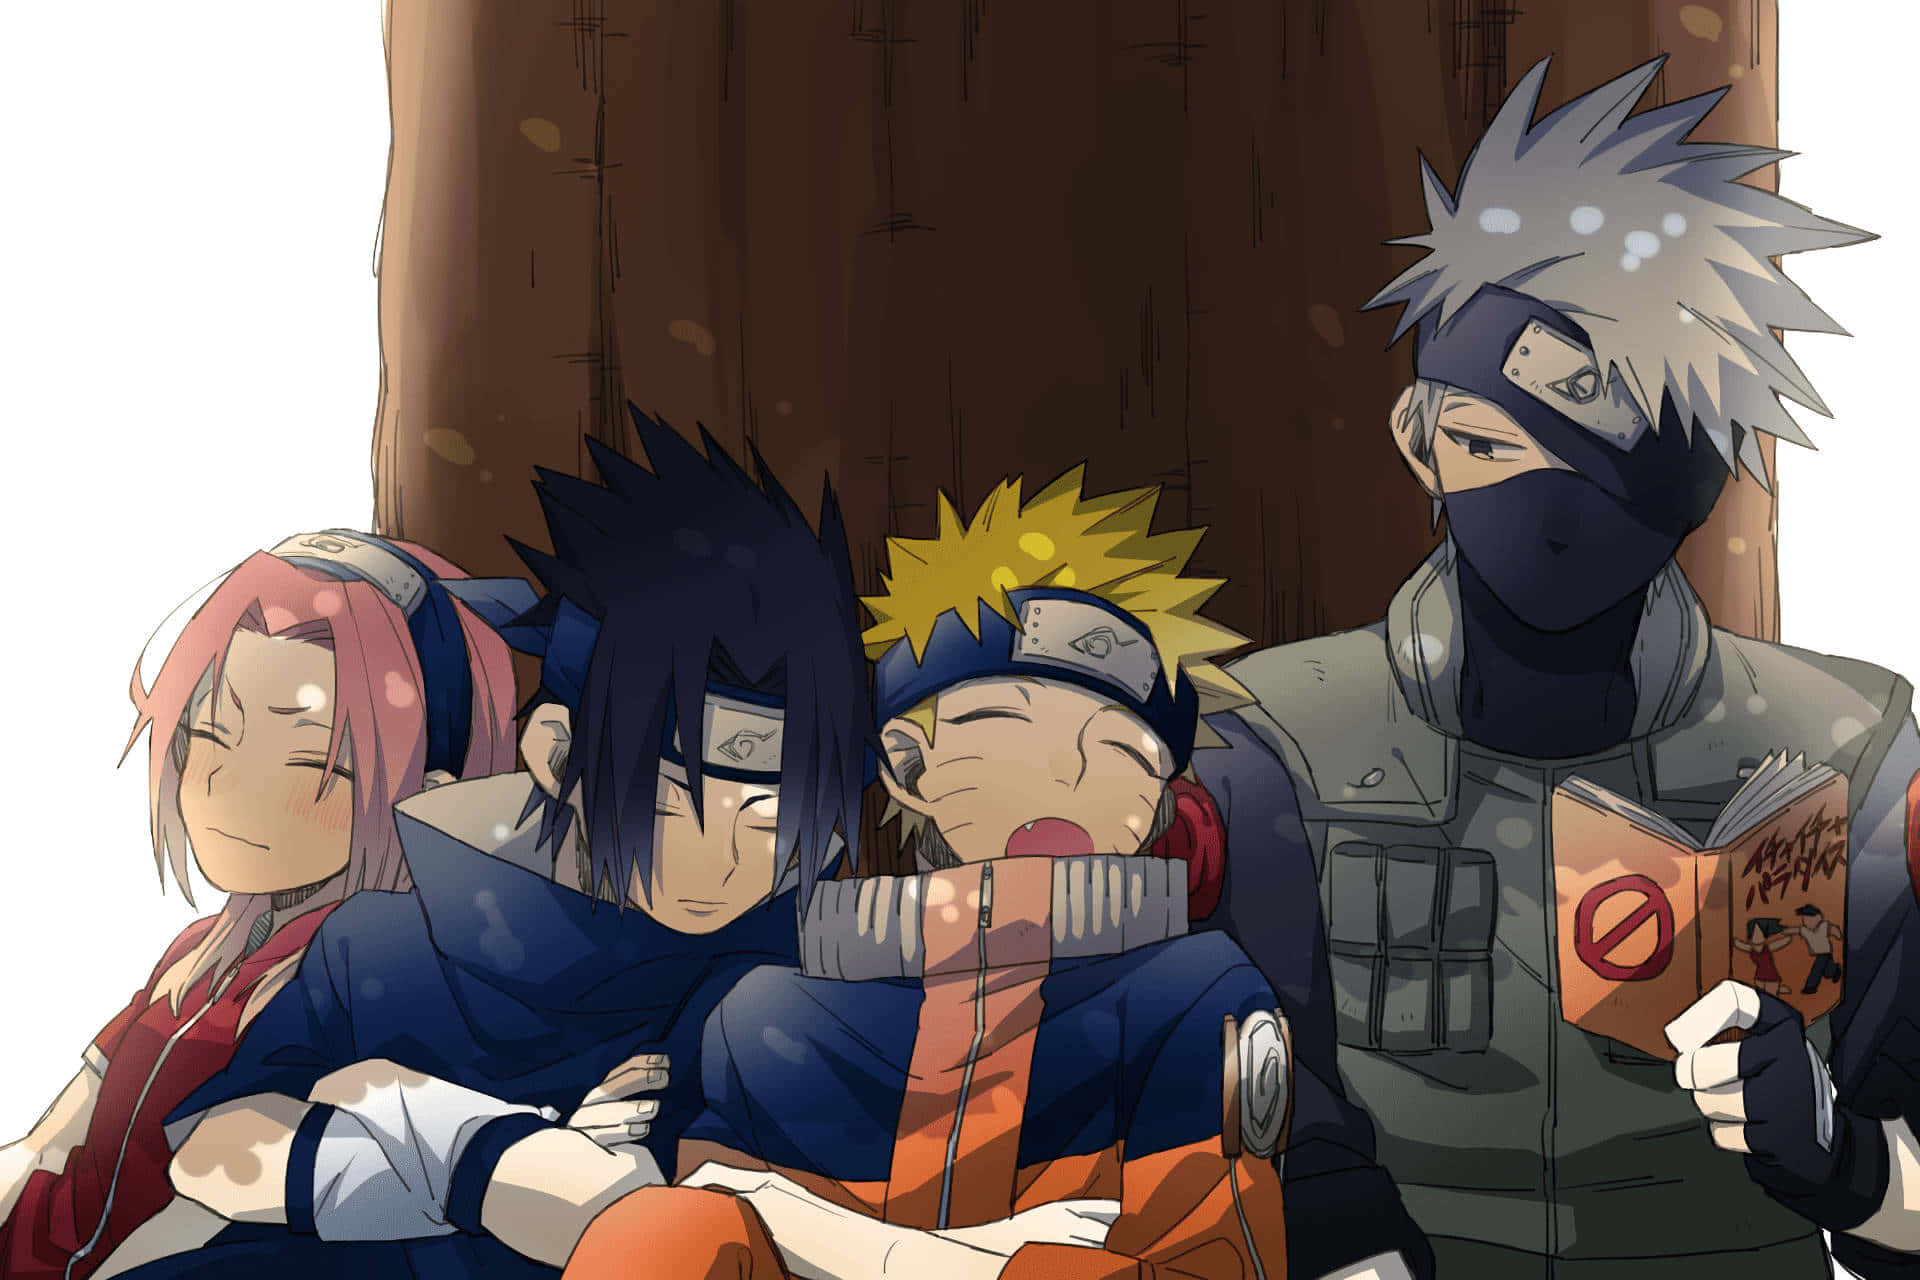 Team 7 of Naruto unites in the face of danger. Wallpaper